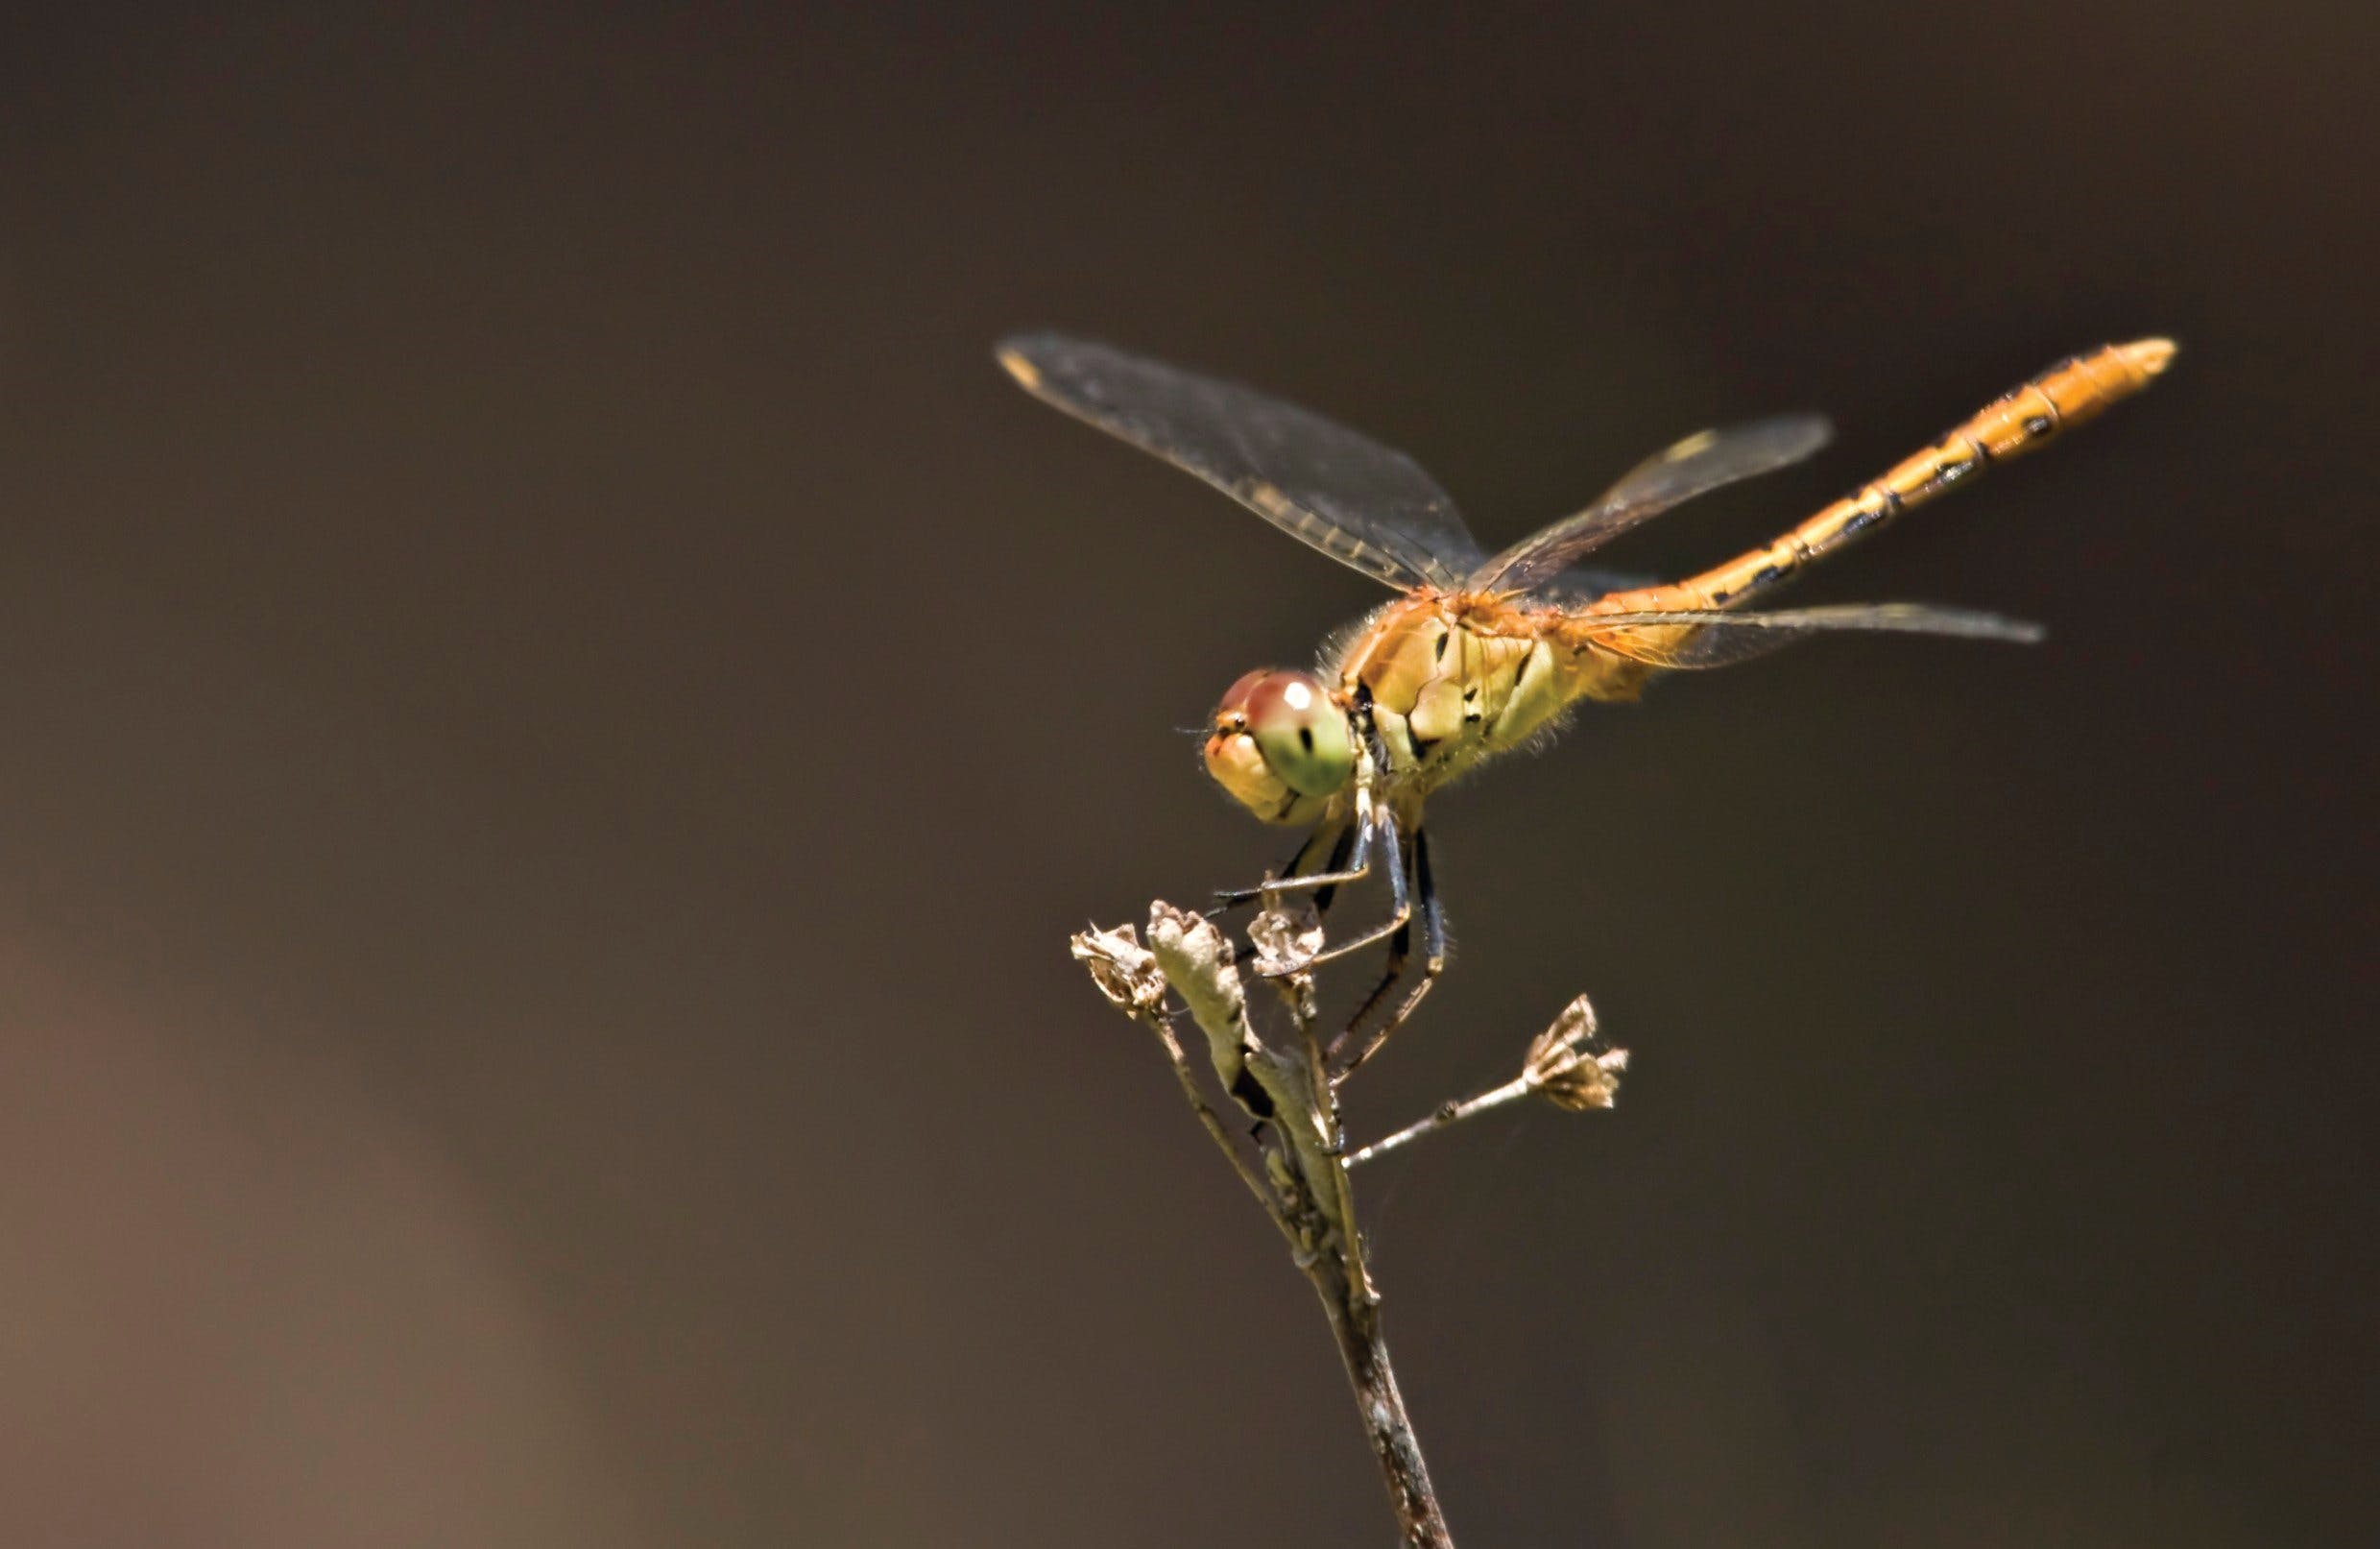 Dragonfly Discovery - Accommodation Mount Tamborine